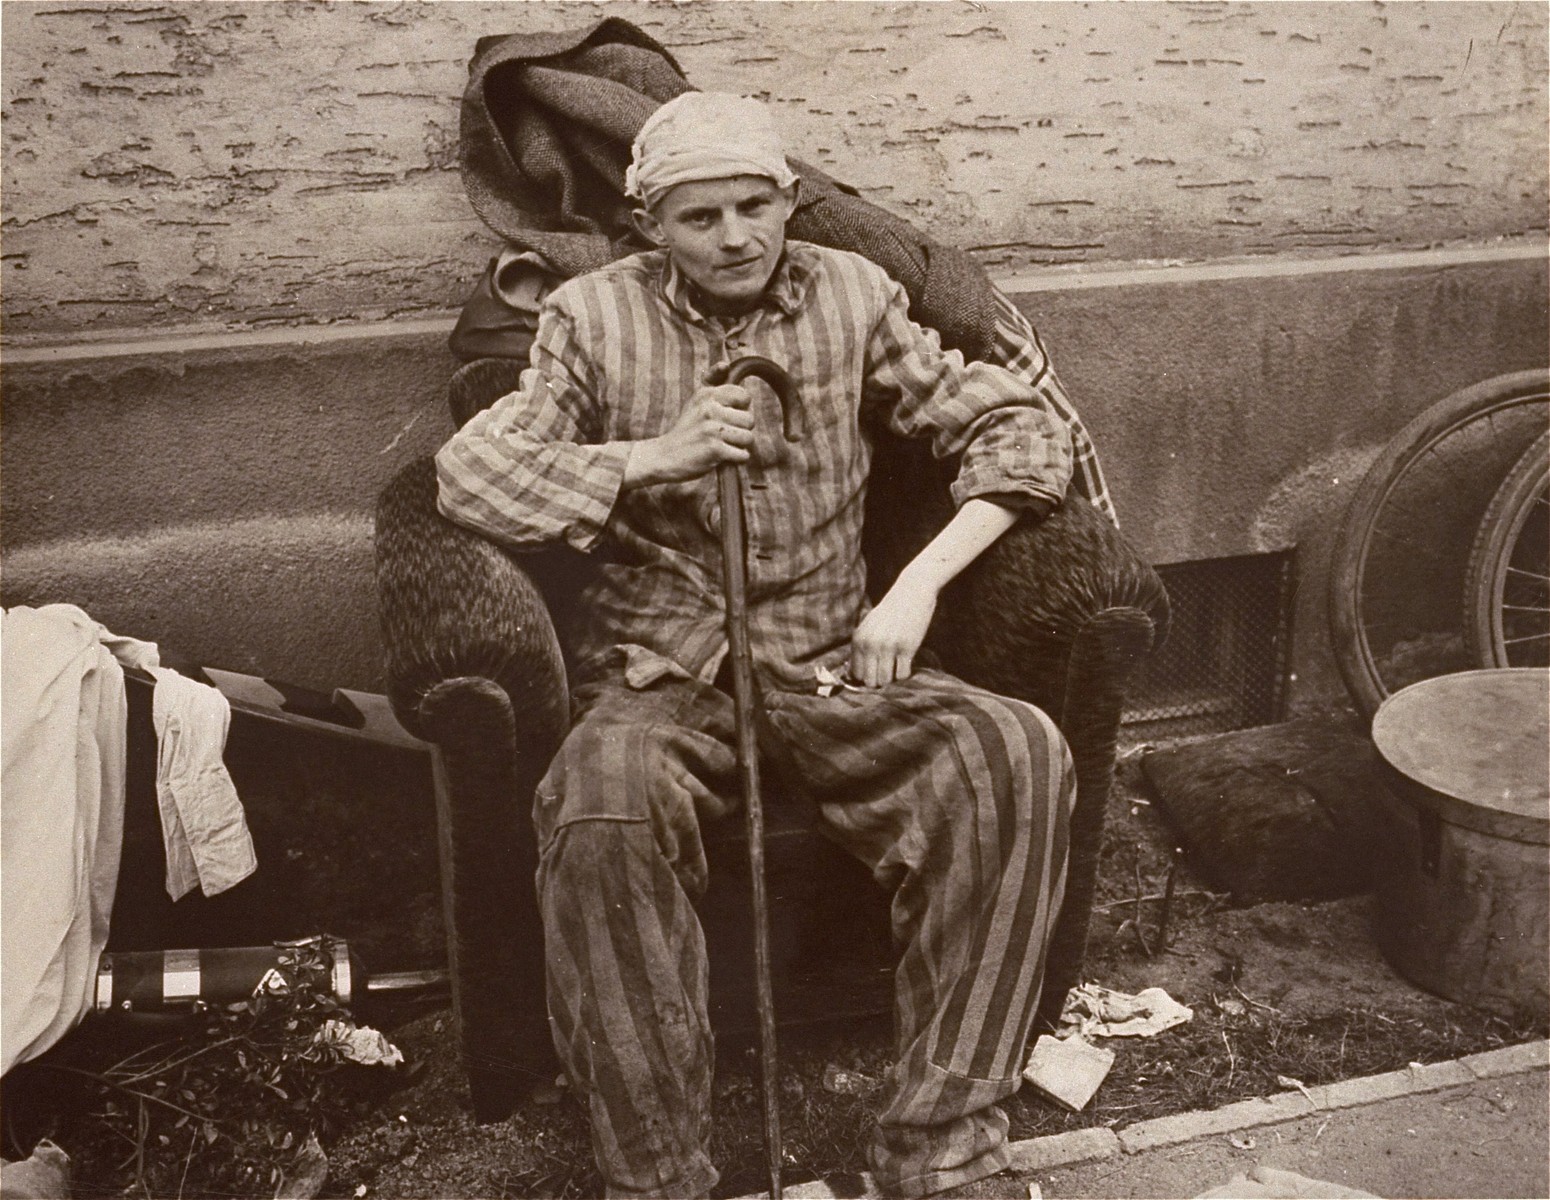 A survivor in Nordhausen relaxes in an easy chair confiscated by American troops from camp personnel.